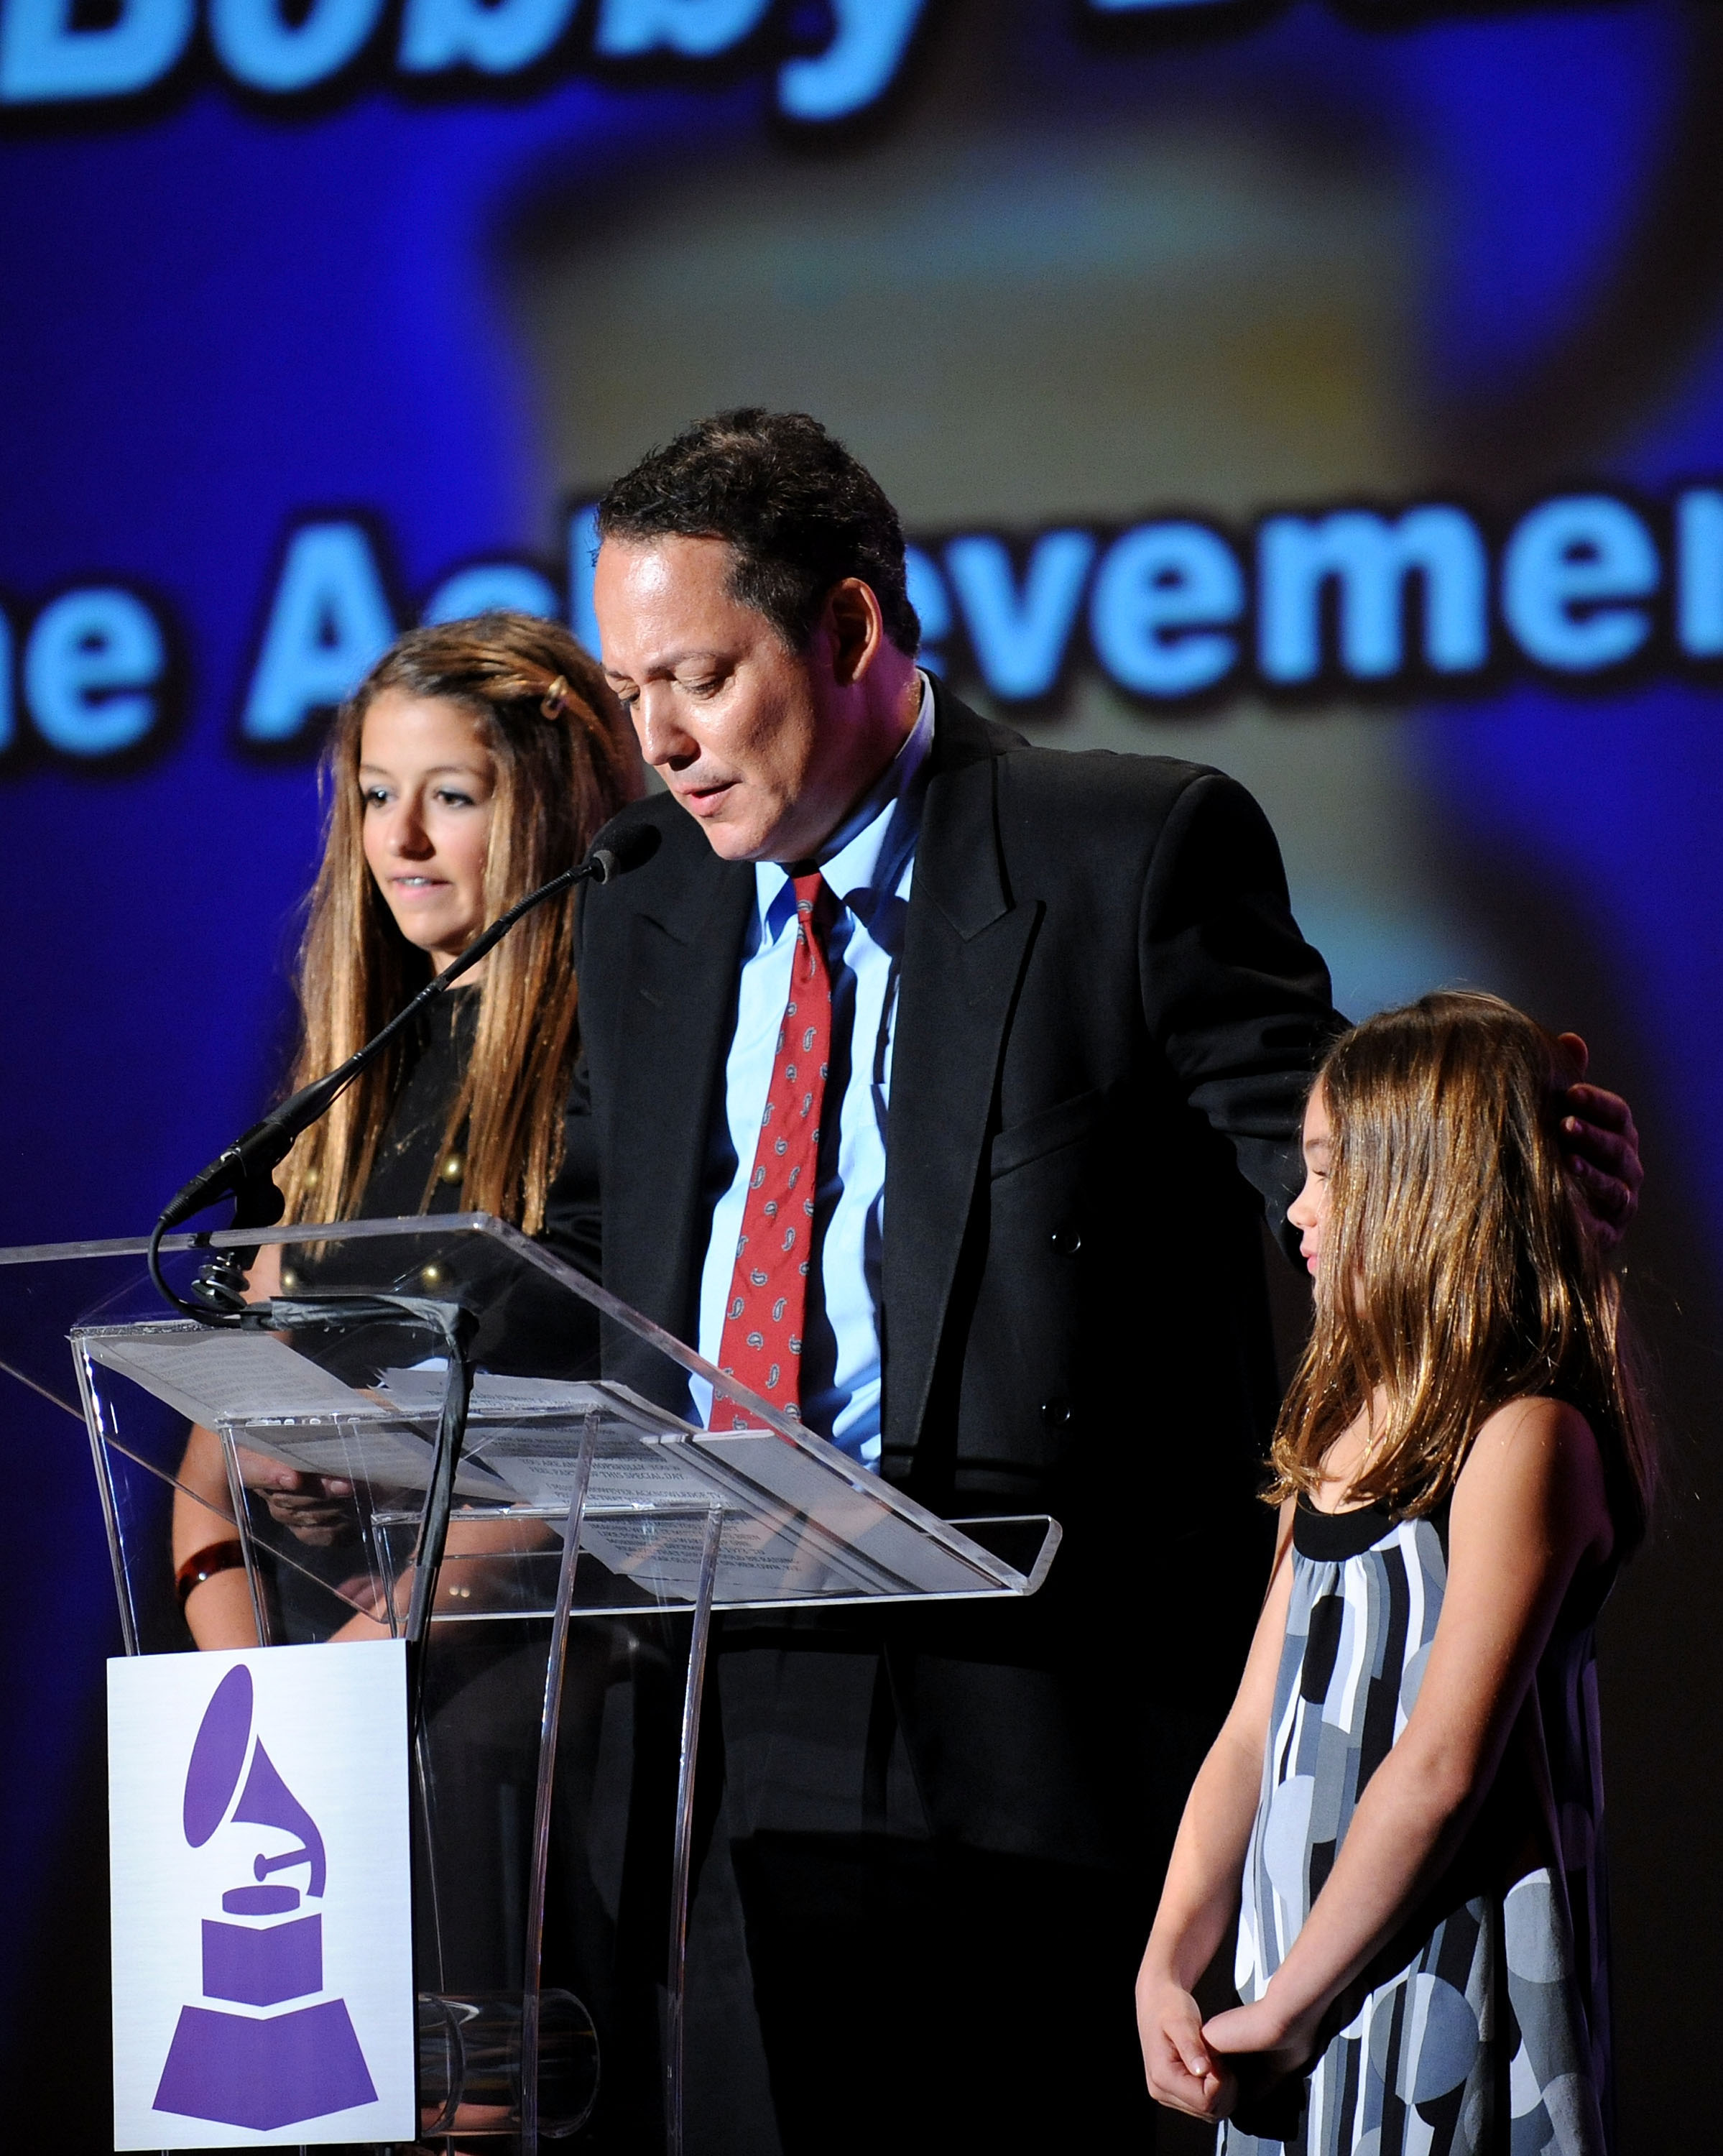 Alexa Darin, Dodd Darin and Olivia Darin accept the Lifetime Achievement Award on behalf of the late Bobby Darin at The Wilshire Ebell Theatre on January 30, 2010, in Los Angeles, California. | Source: Getty Images